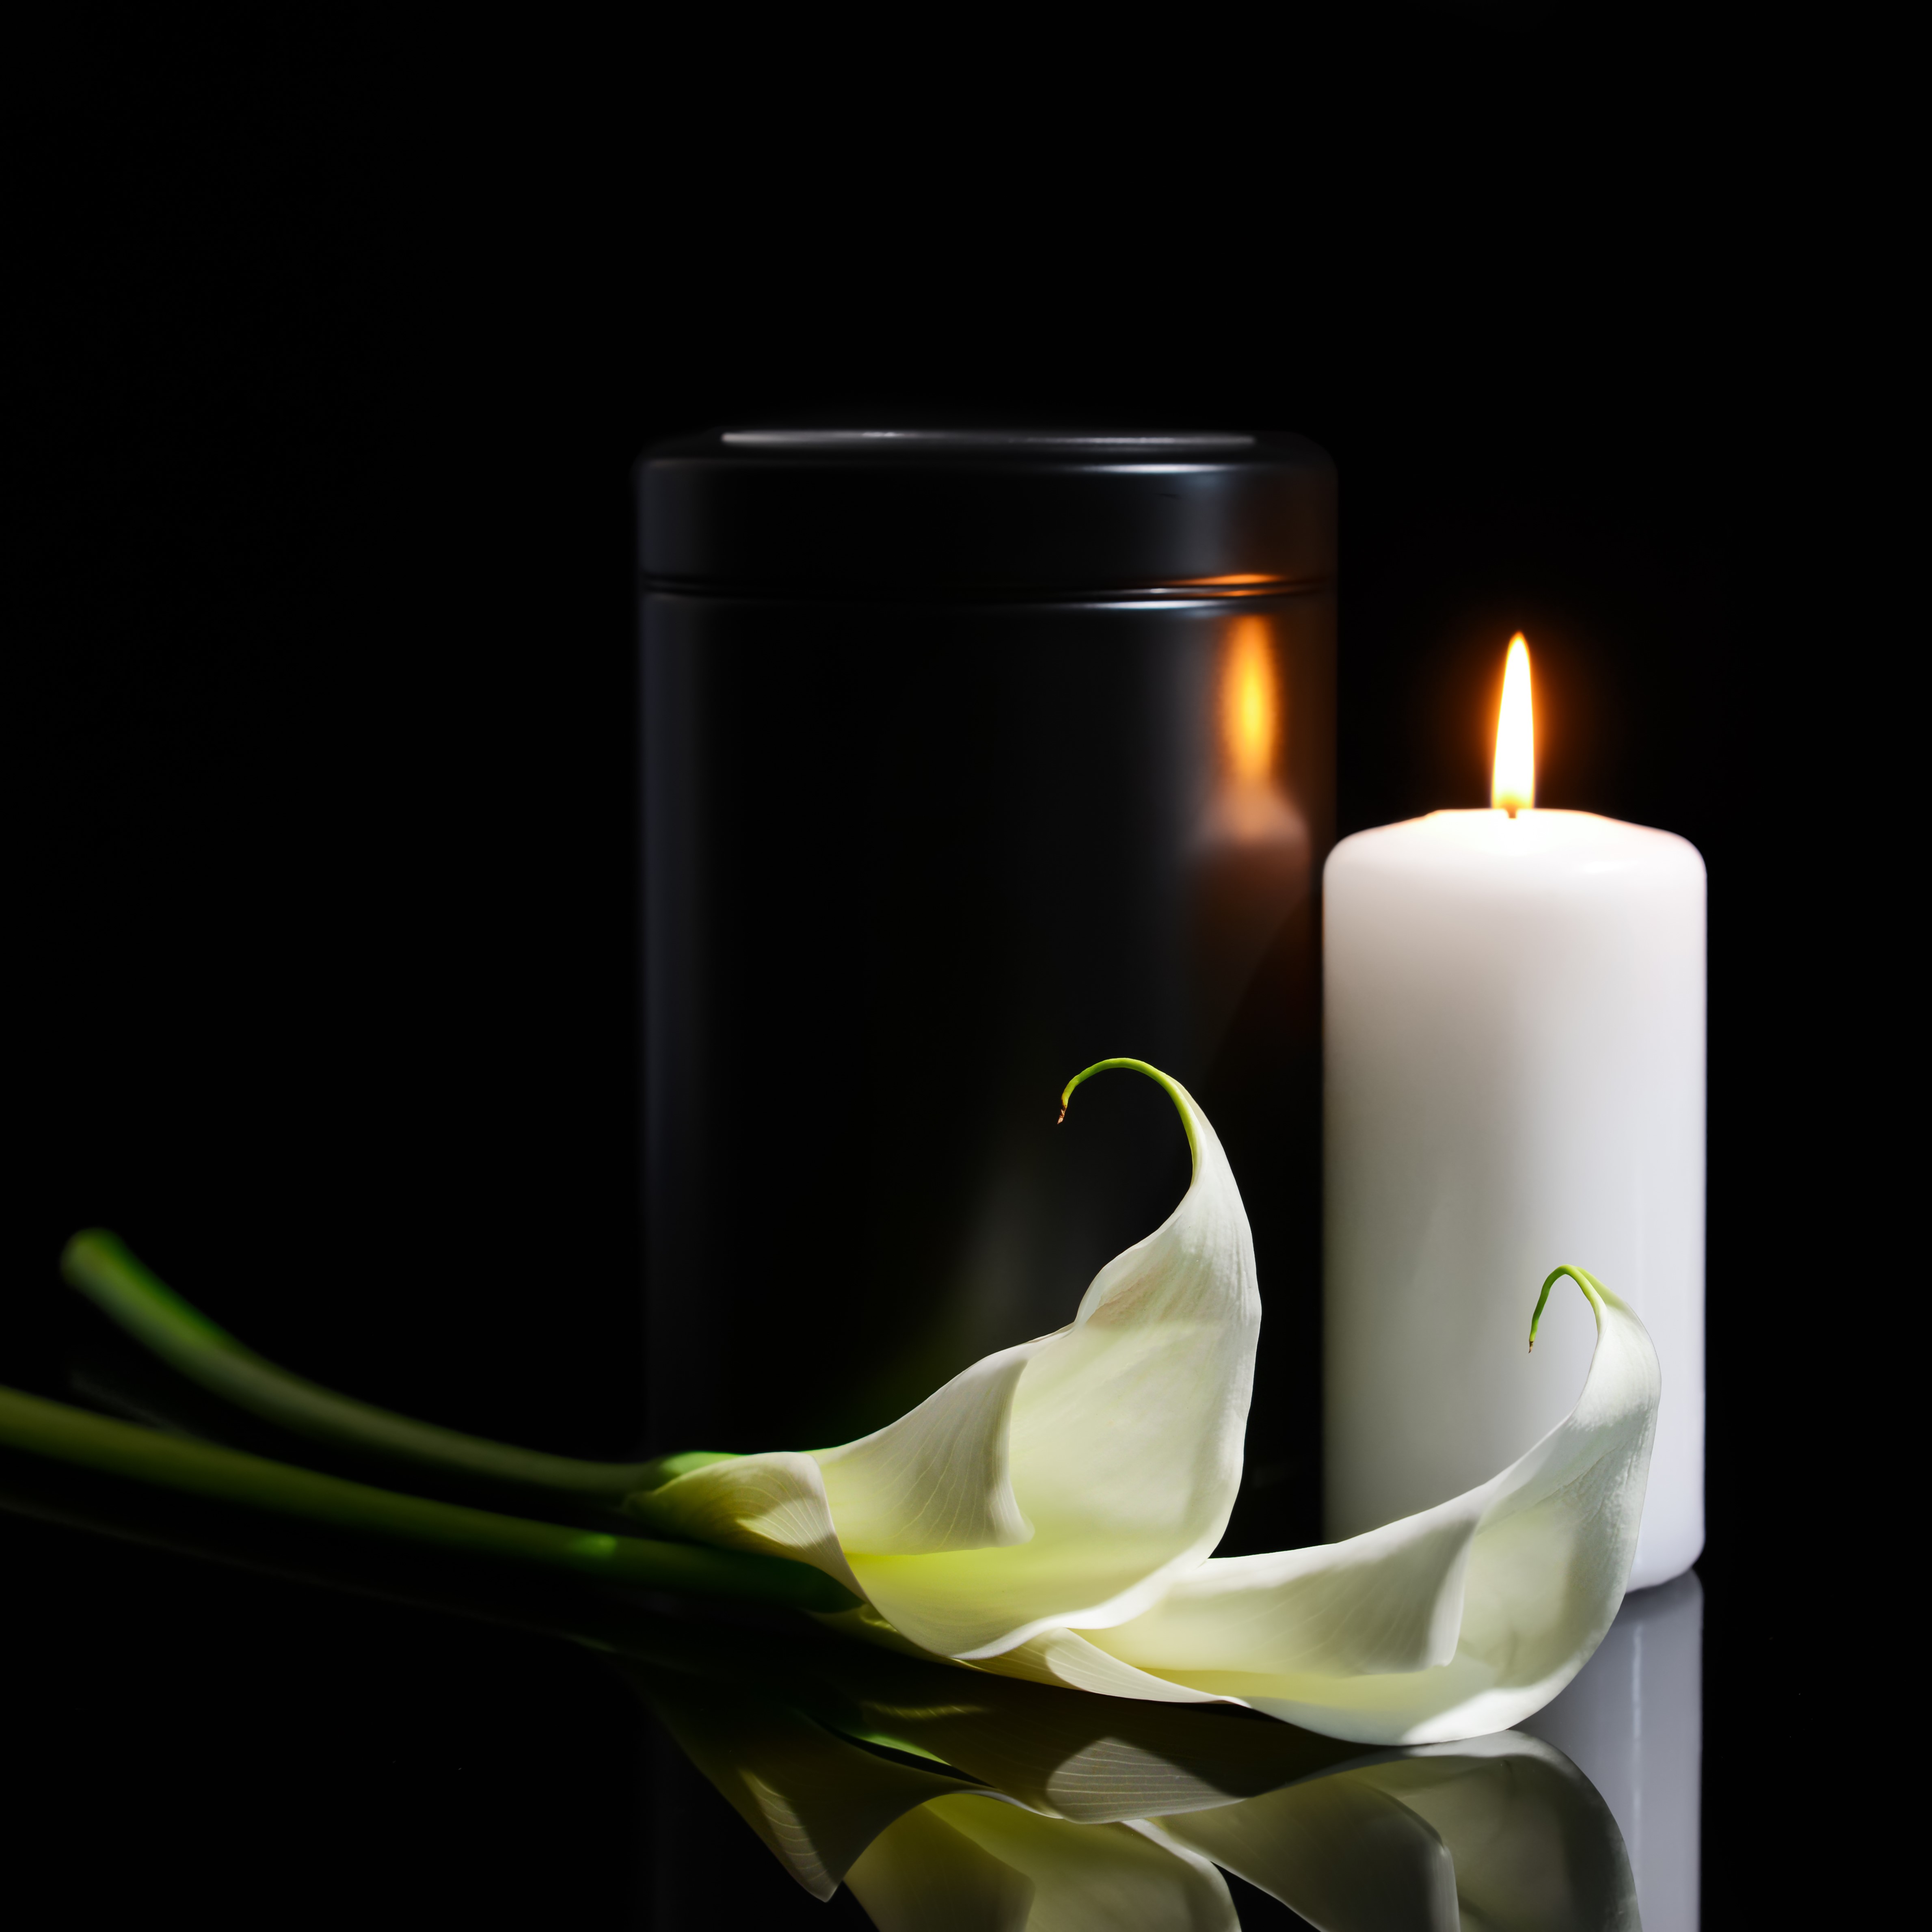 calla lily, candle and urn